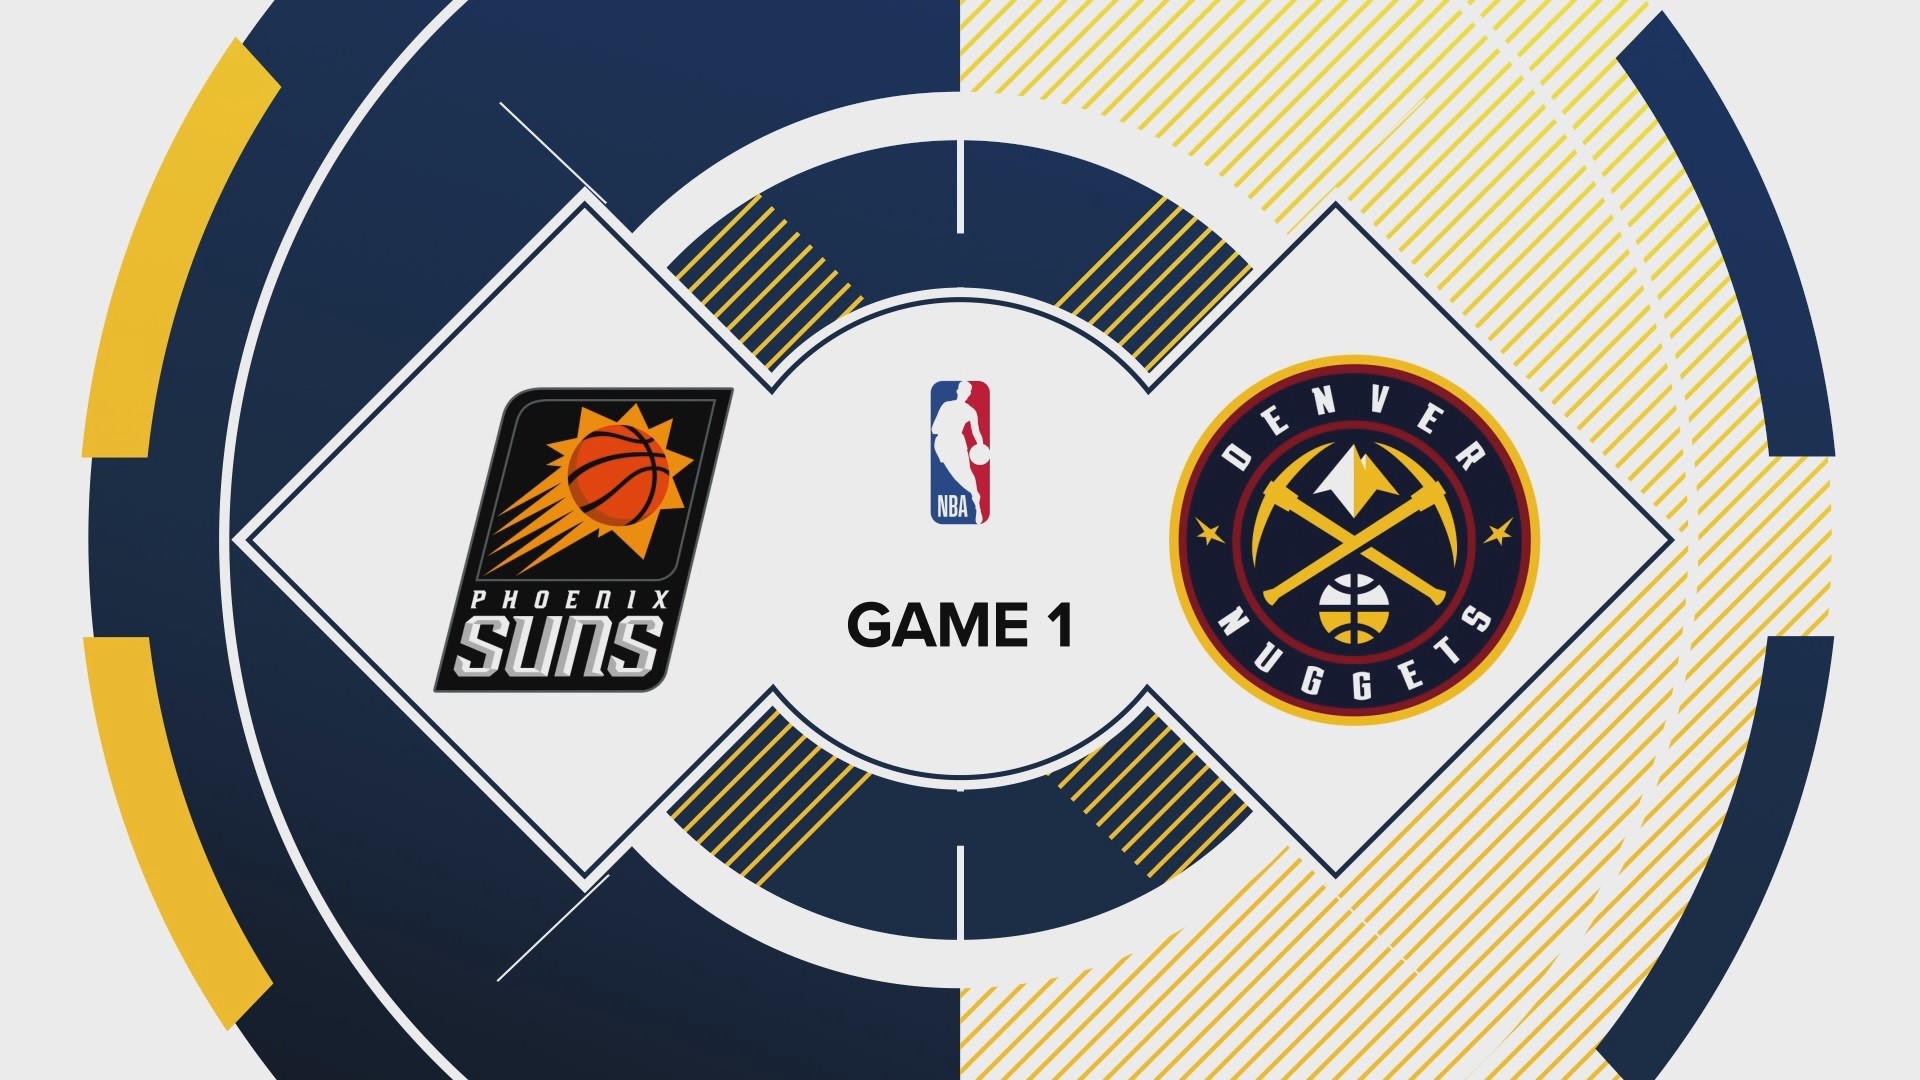 Denver and Phoenix kick off the Western Conference Semifinals on Saturday night at Ball Arena.